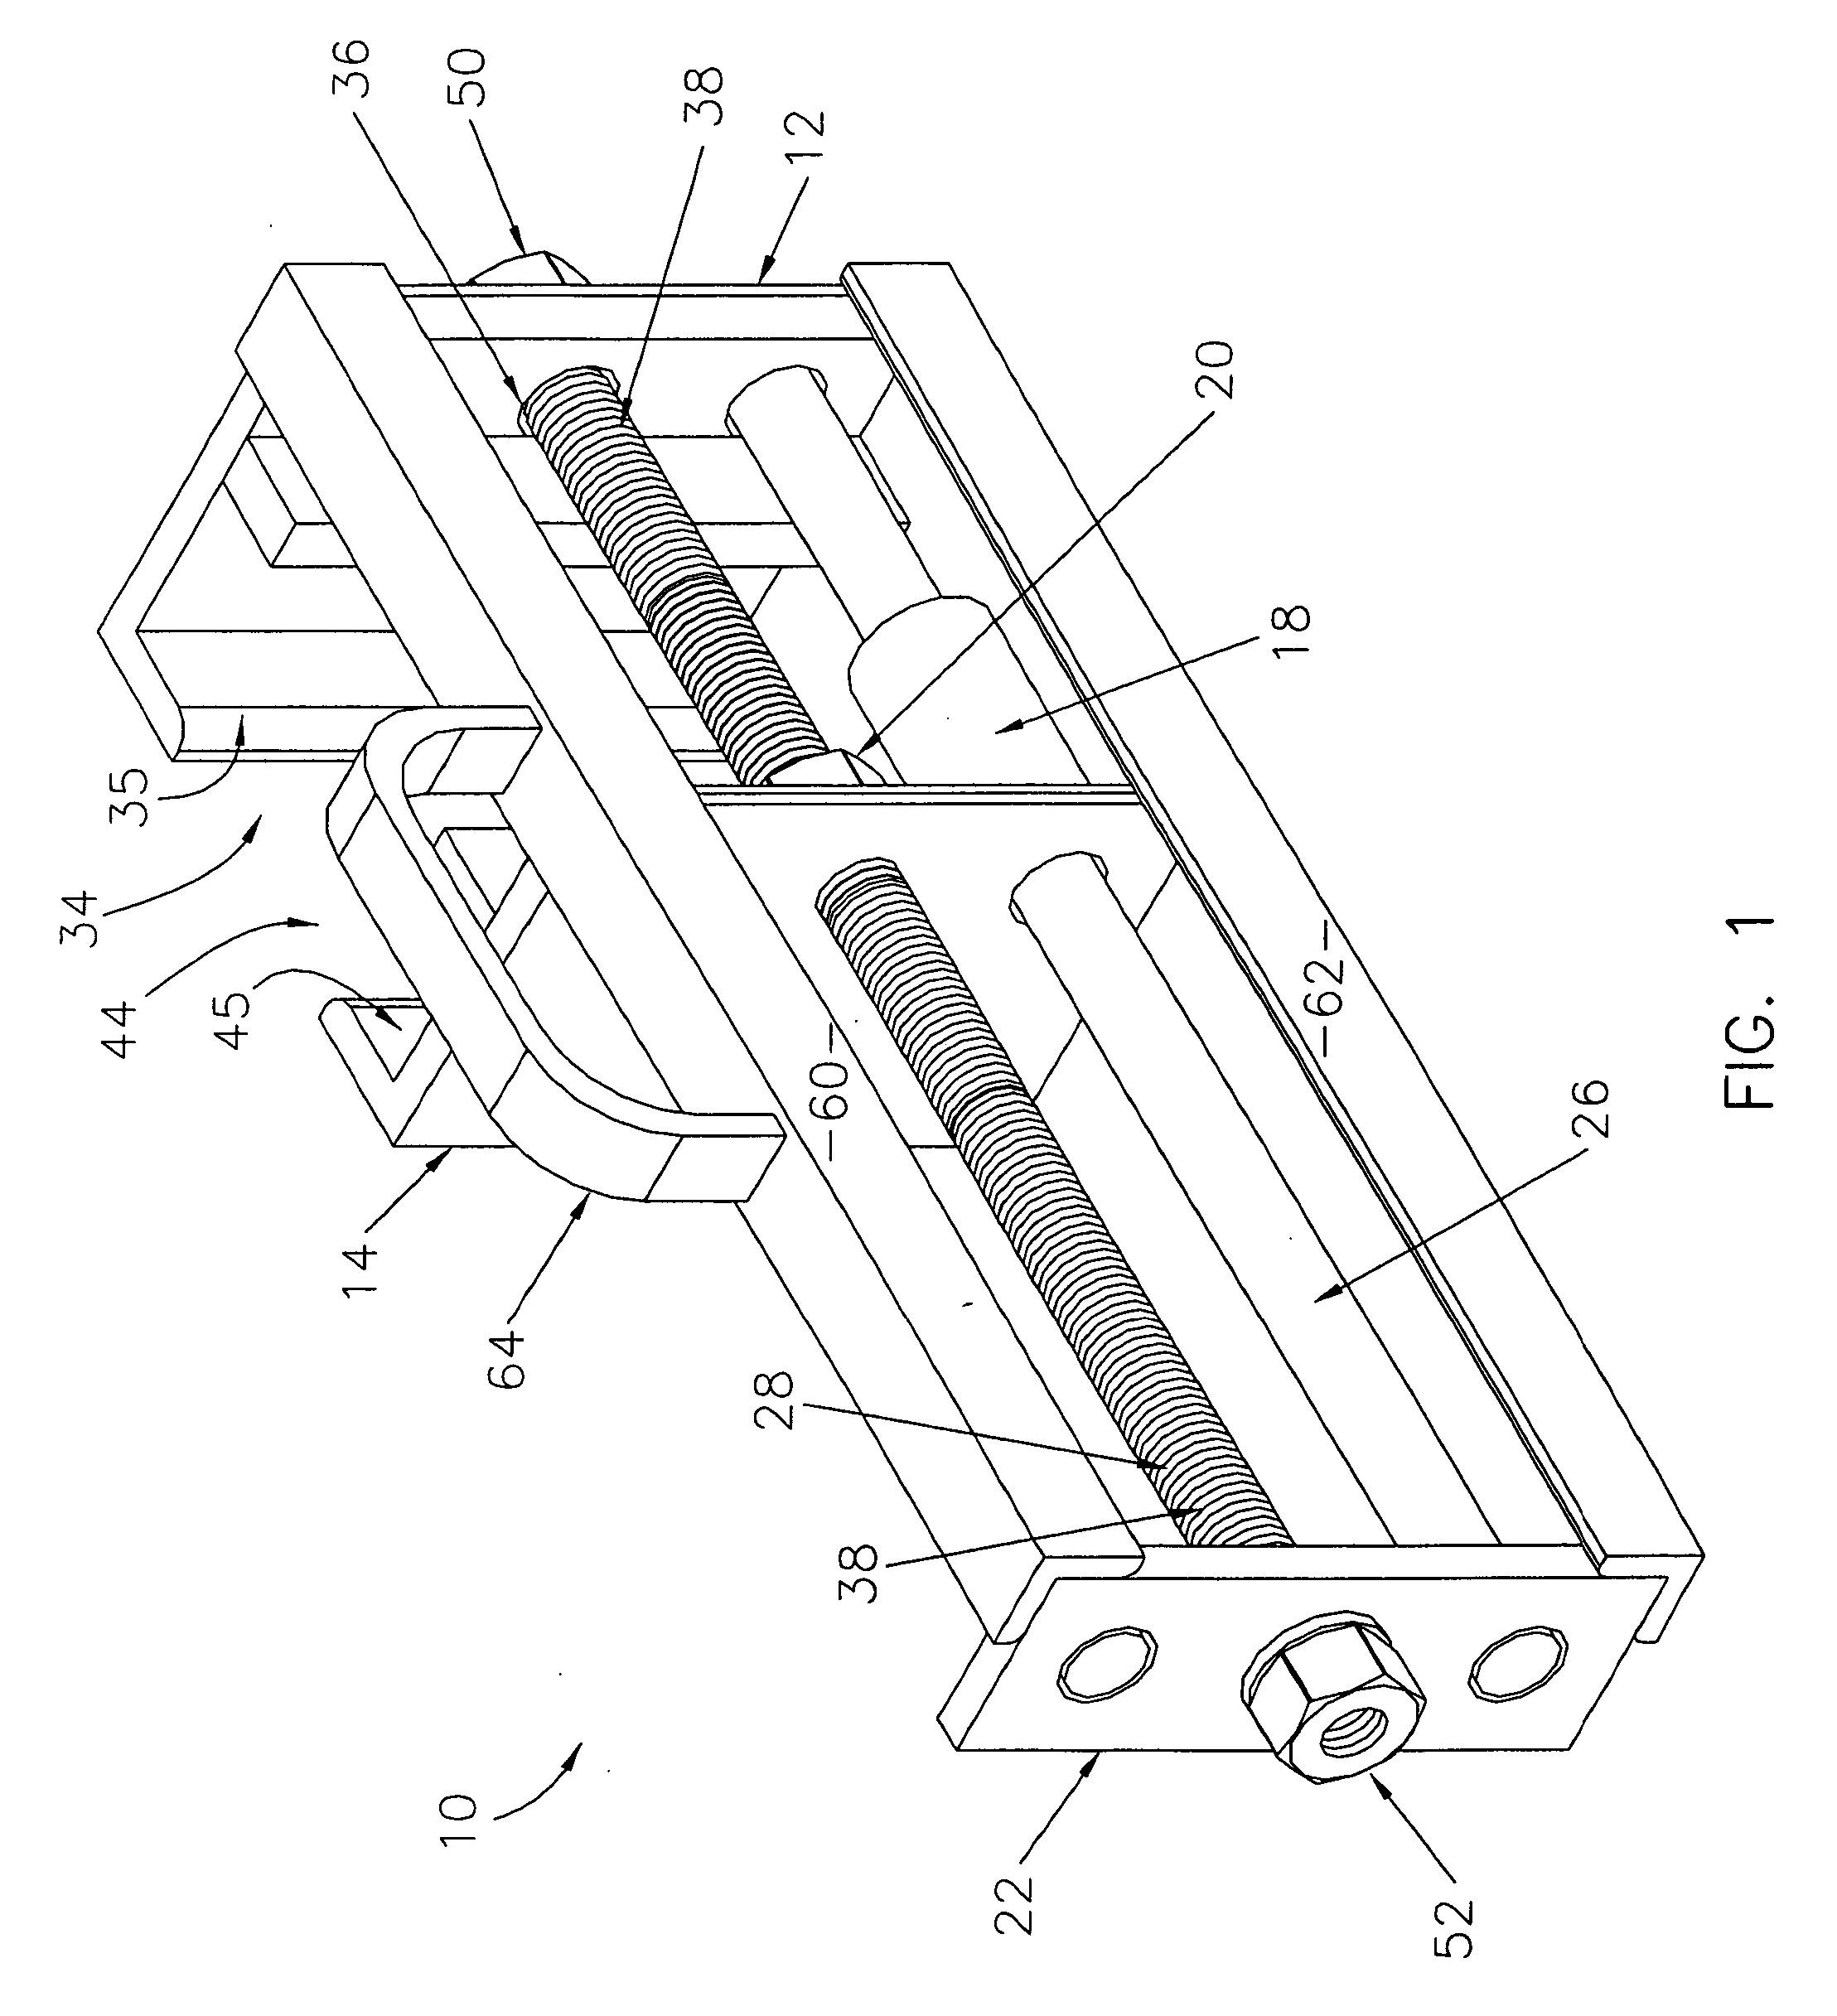 Device for facilitating connection of terminal ends of vehicle track to form closed loop